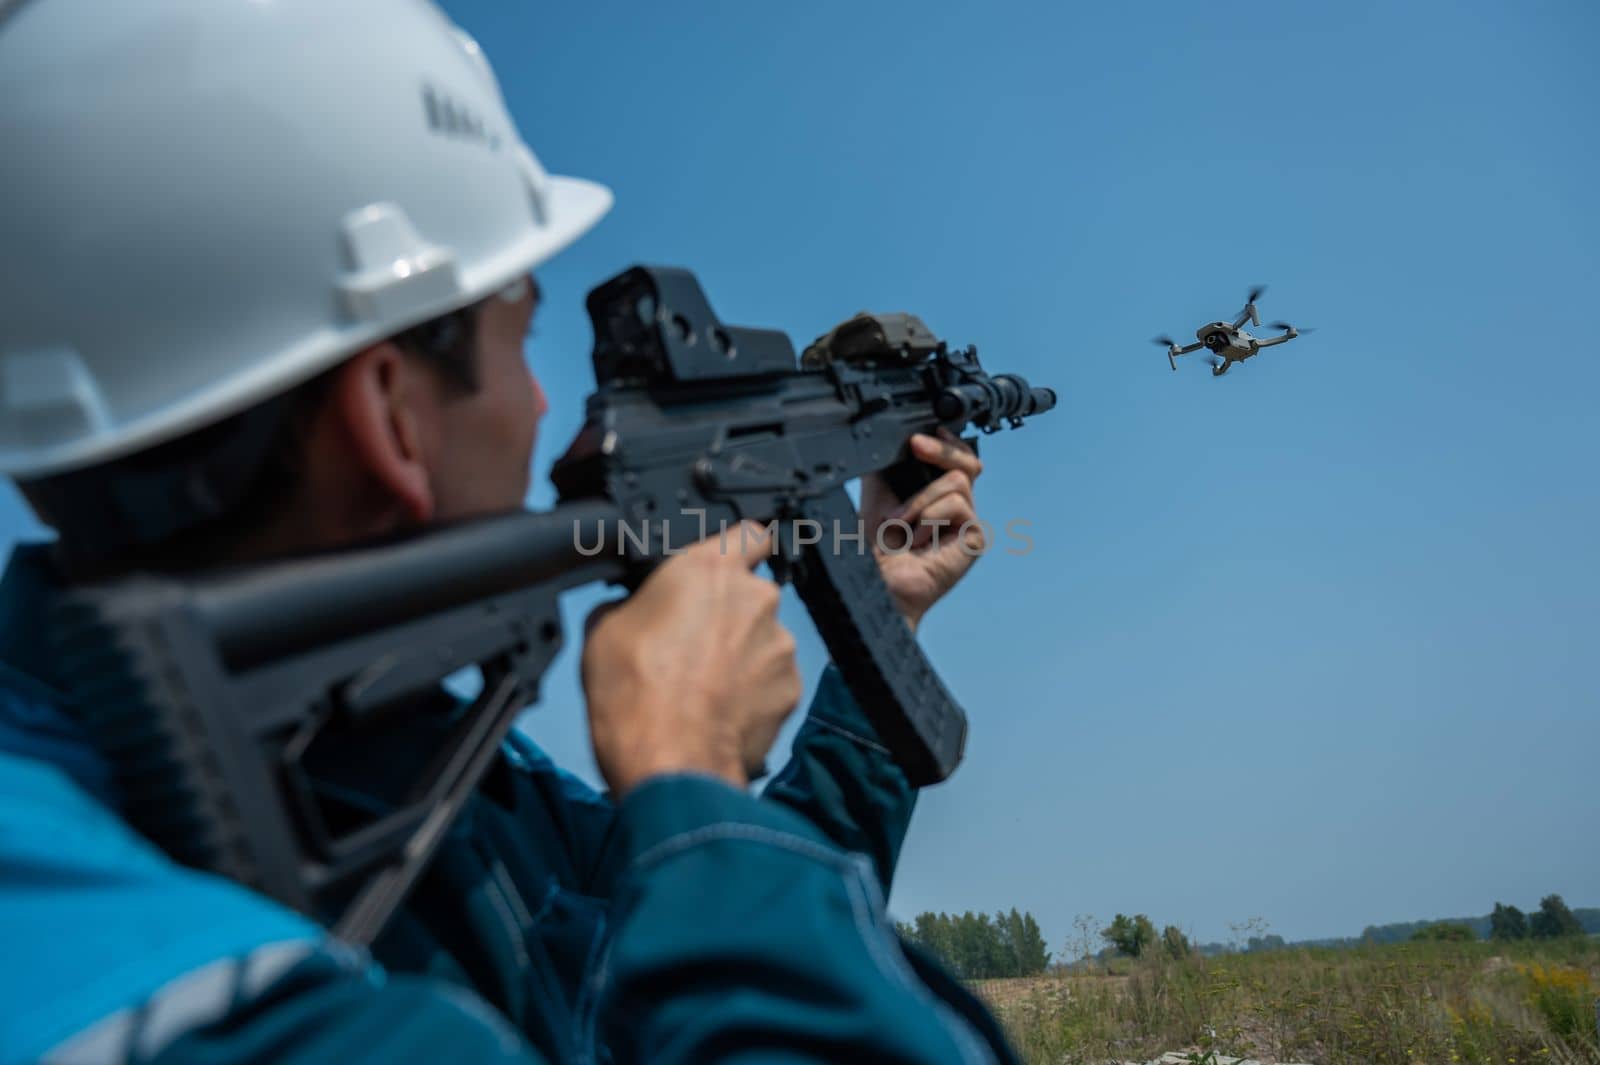 Caucasian man in a helmet shoots a flying drone with a rifle